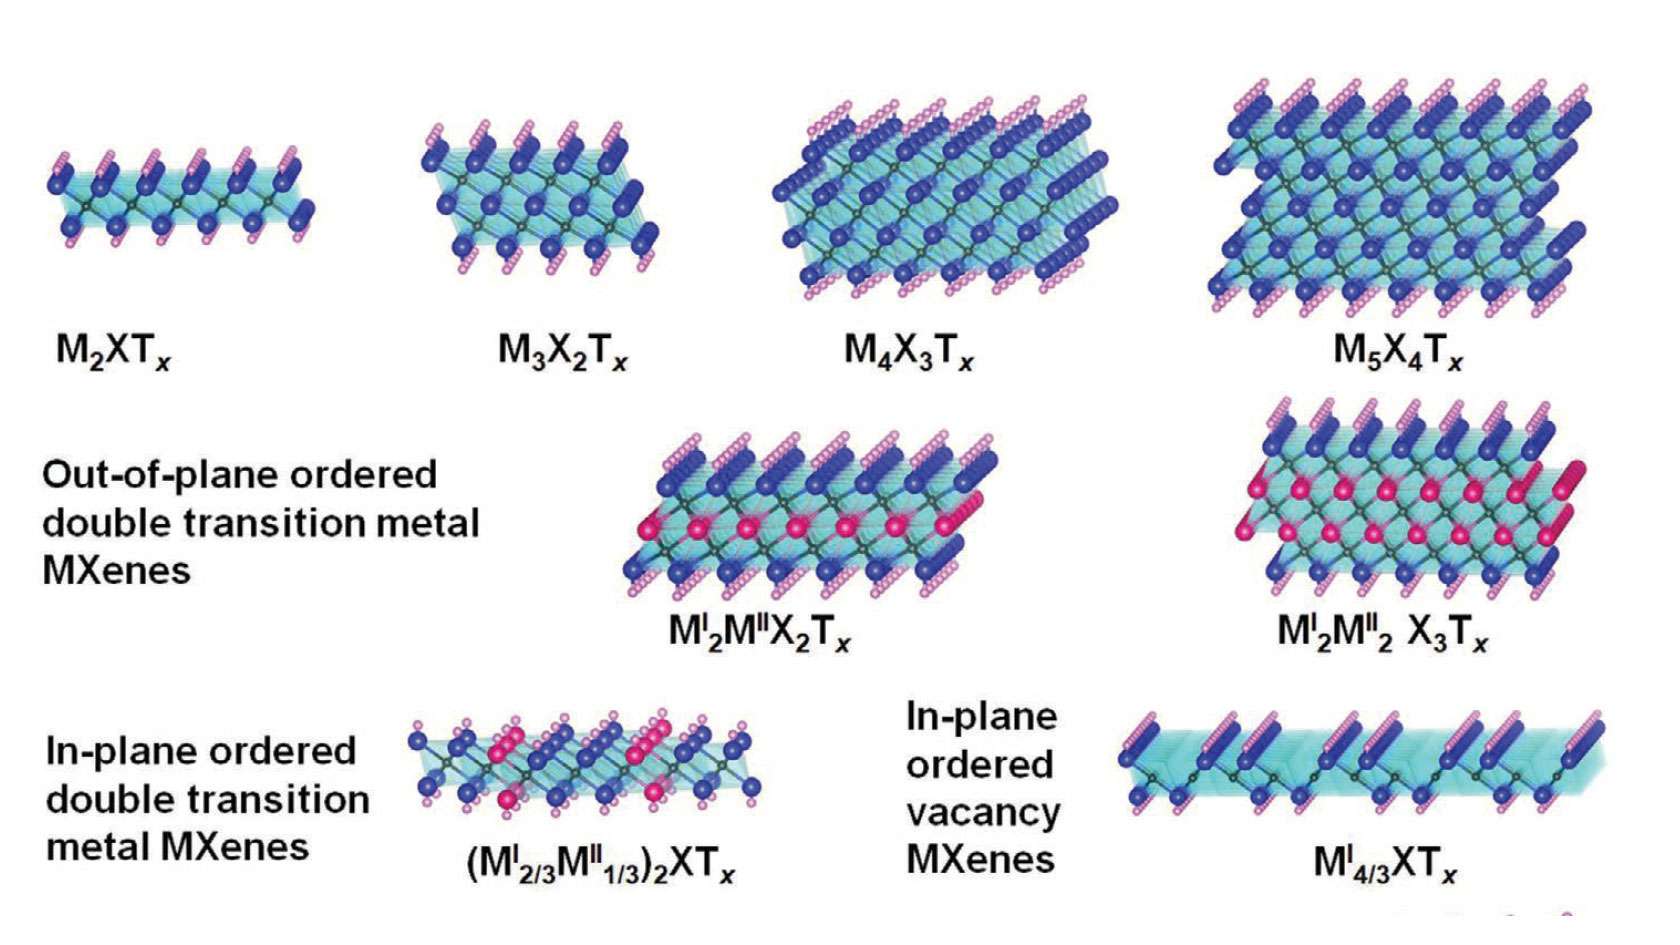 Our Perspective Article “Ten Years of Progress in the Synthesis and Development of MXenes” is Now Published in Advanced Materials